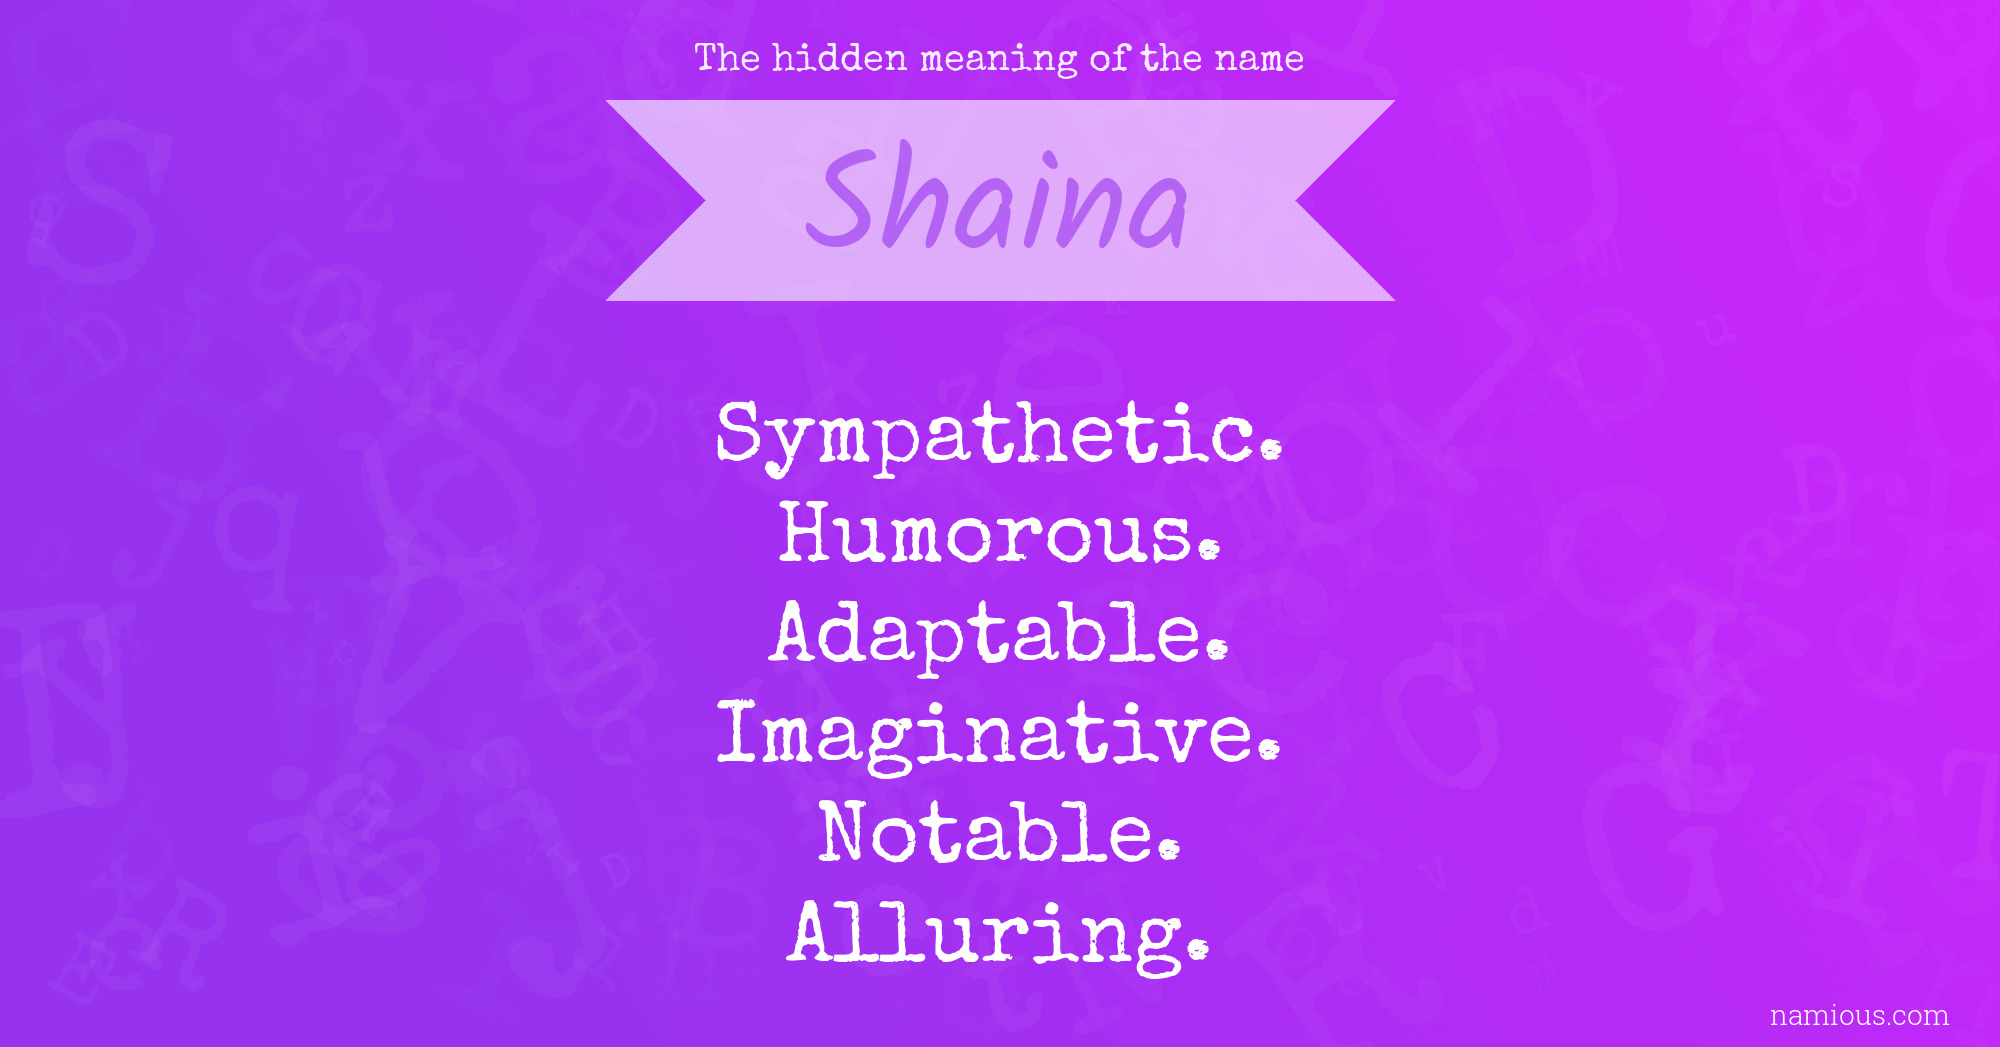 The hidden meaning of the name Shaina